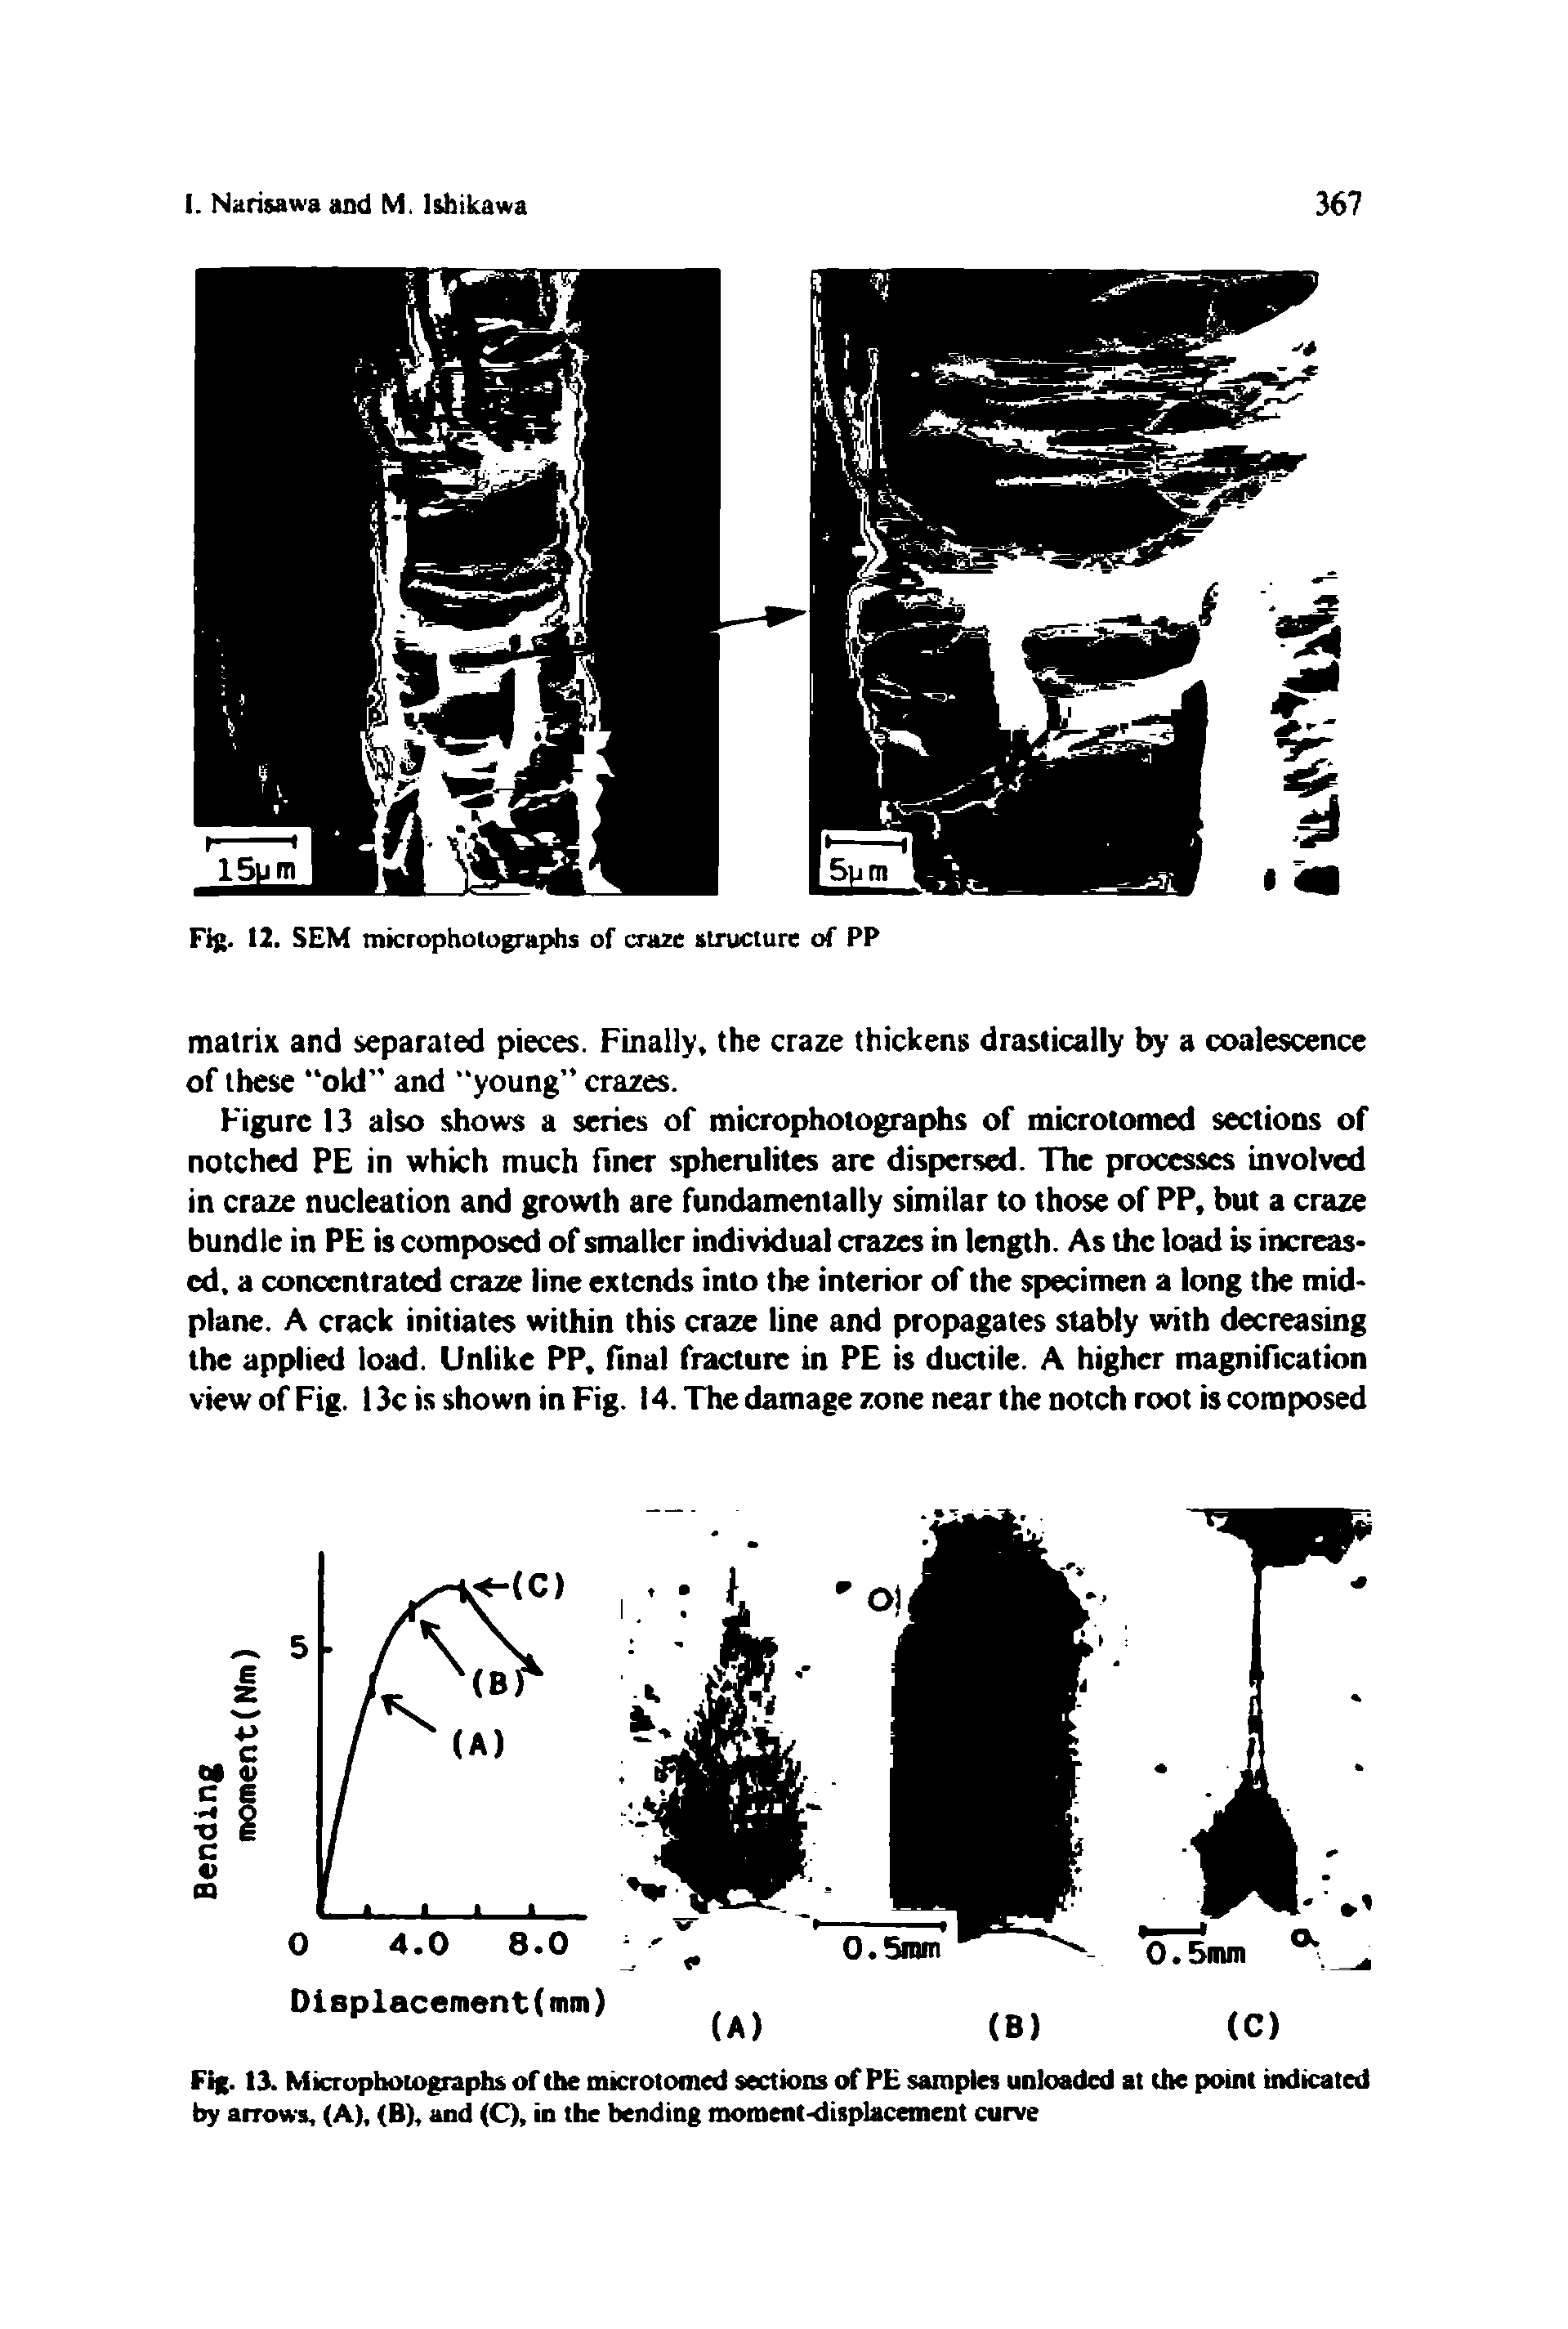 Figure 13 also shows a series of microphotographs of microtomed sections of notched PE in which much finer sphcrulites arc dispersed. The processes involved in craze nucleation and growth are fundamentally similar to those of PP, but a craze bundle in PE is composed of smaller individual crazes in length. As the load is increased, a concentrated craze line extends into the interior of the specimen a long the midplane. A crack initiates within this craze line and propagates stably with decreasing the applied load. Unlike PP. final fracture in PE is ductile. A higher magnification view of Fig. 13c is shown in Fig. 14. The damage zone near the notch root is composed...